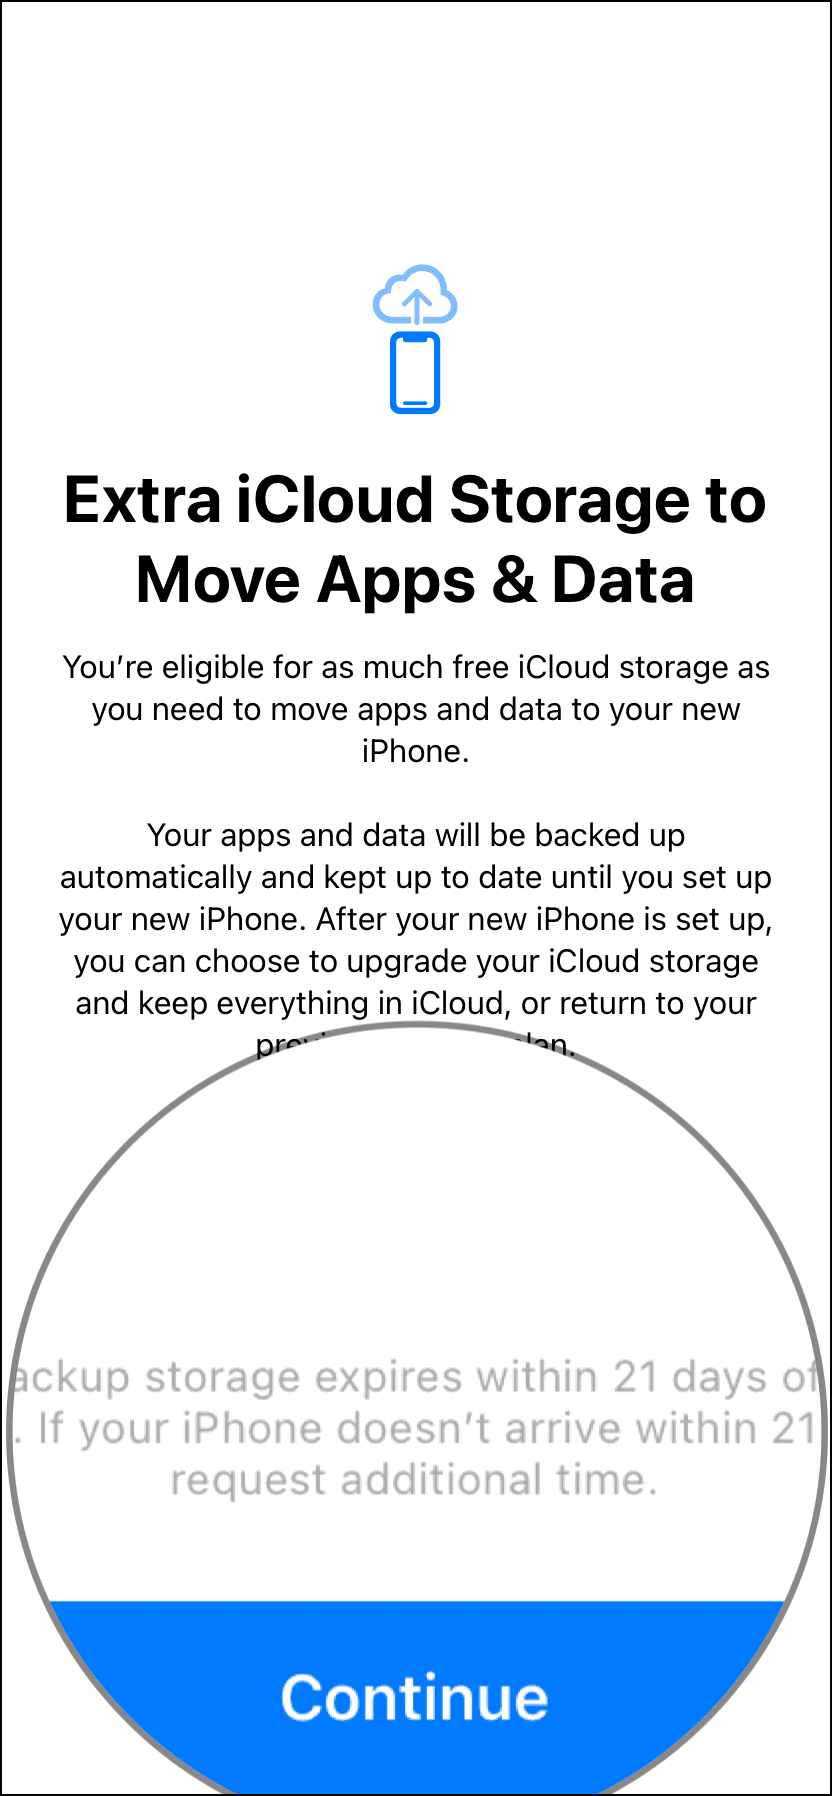 Request additional time after 21 days for temporary iCloud backup on iPhone